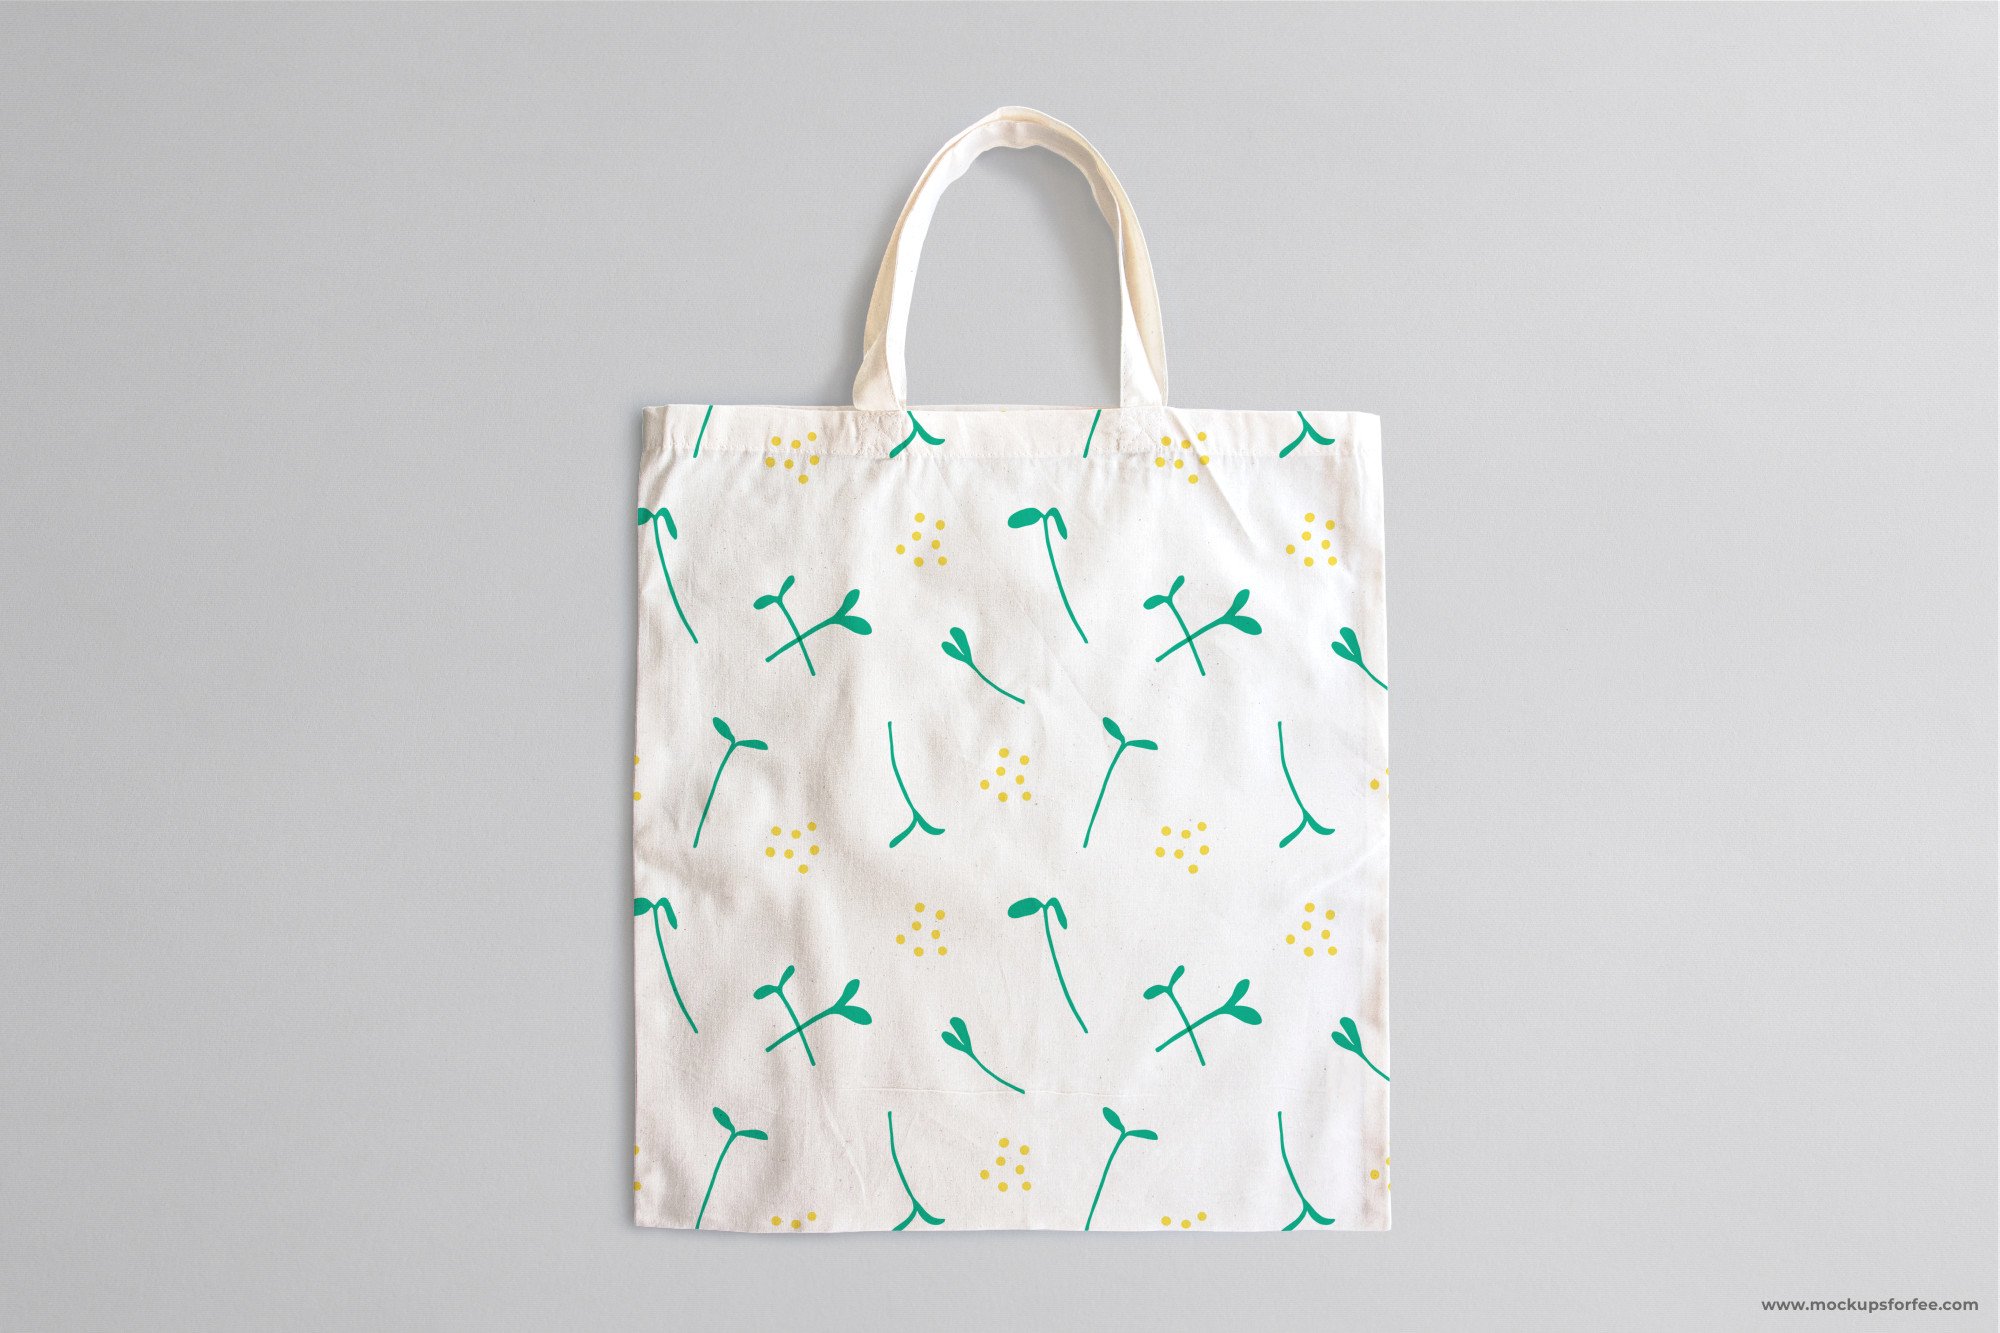 White shopping bag with green and yellow flowers on it.